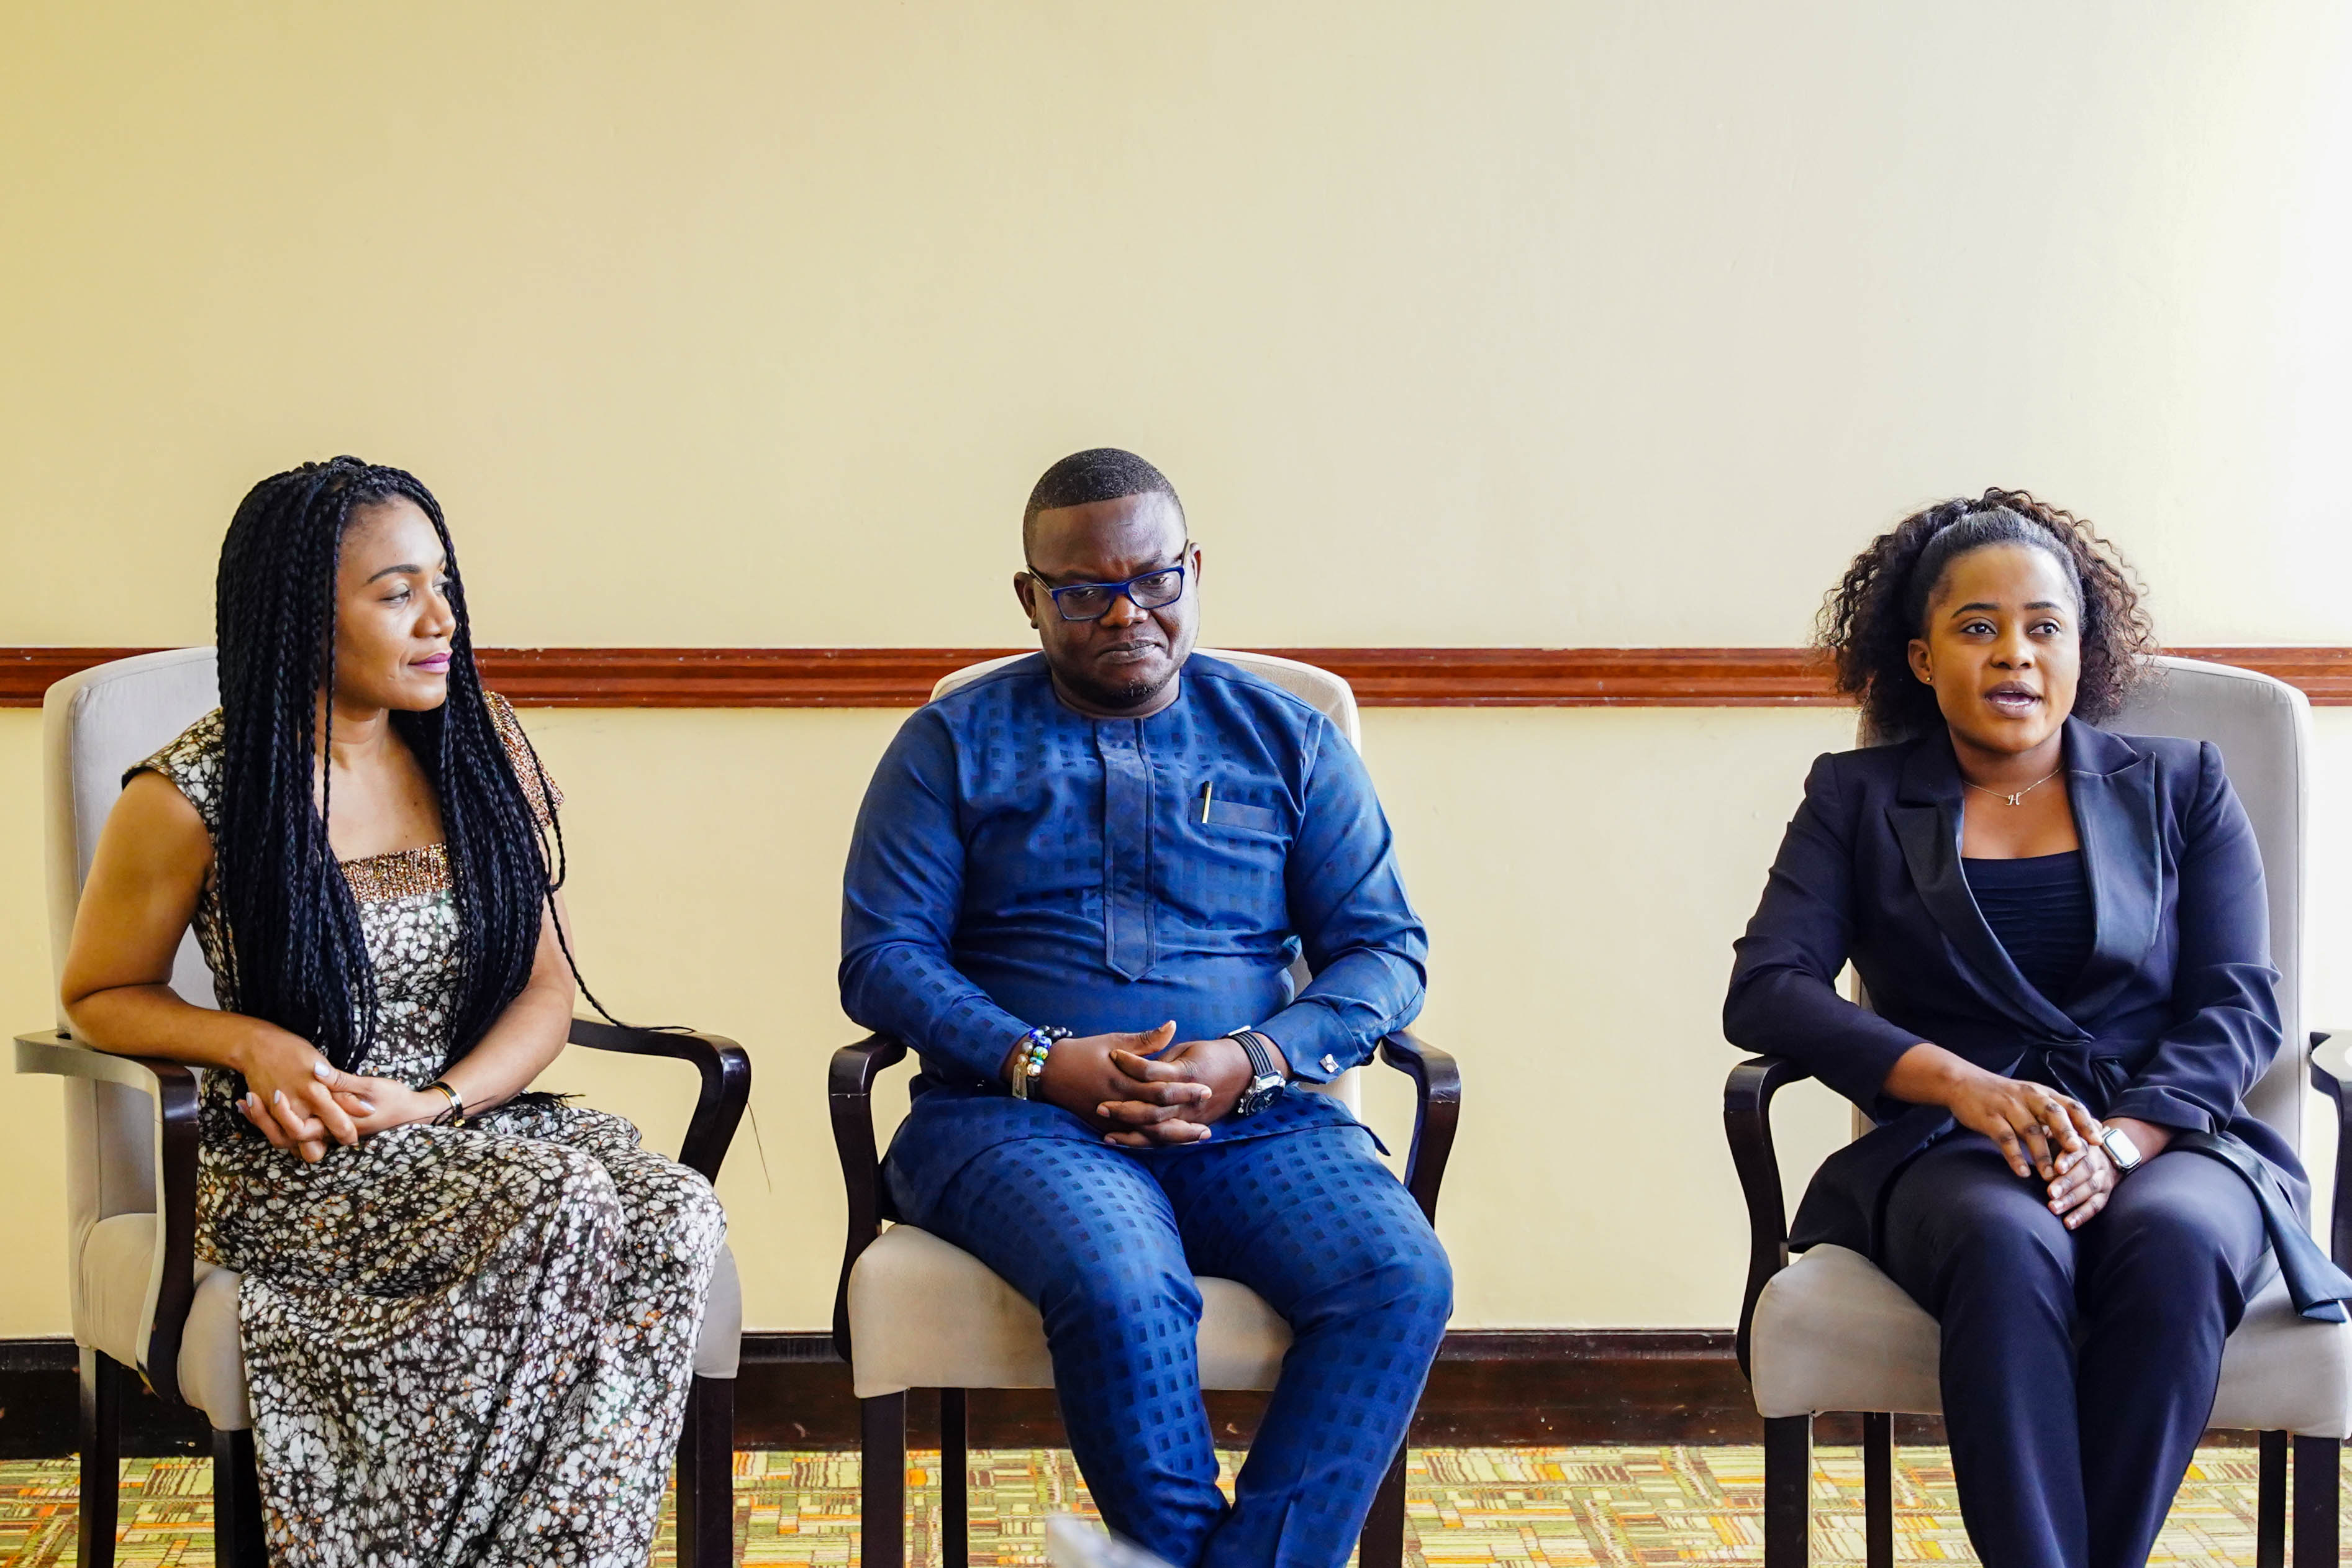 (L-R) Dr. Nkiru Balonwu, Founder Of The Africa Soft Power Project, Gayheart Mensah, Board Member of Africa Prosperity Network and Hannah Akuwu, Executive Secretary of Africa Prosperity Network during a news conference in Kigali on May 27 